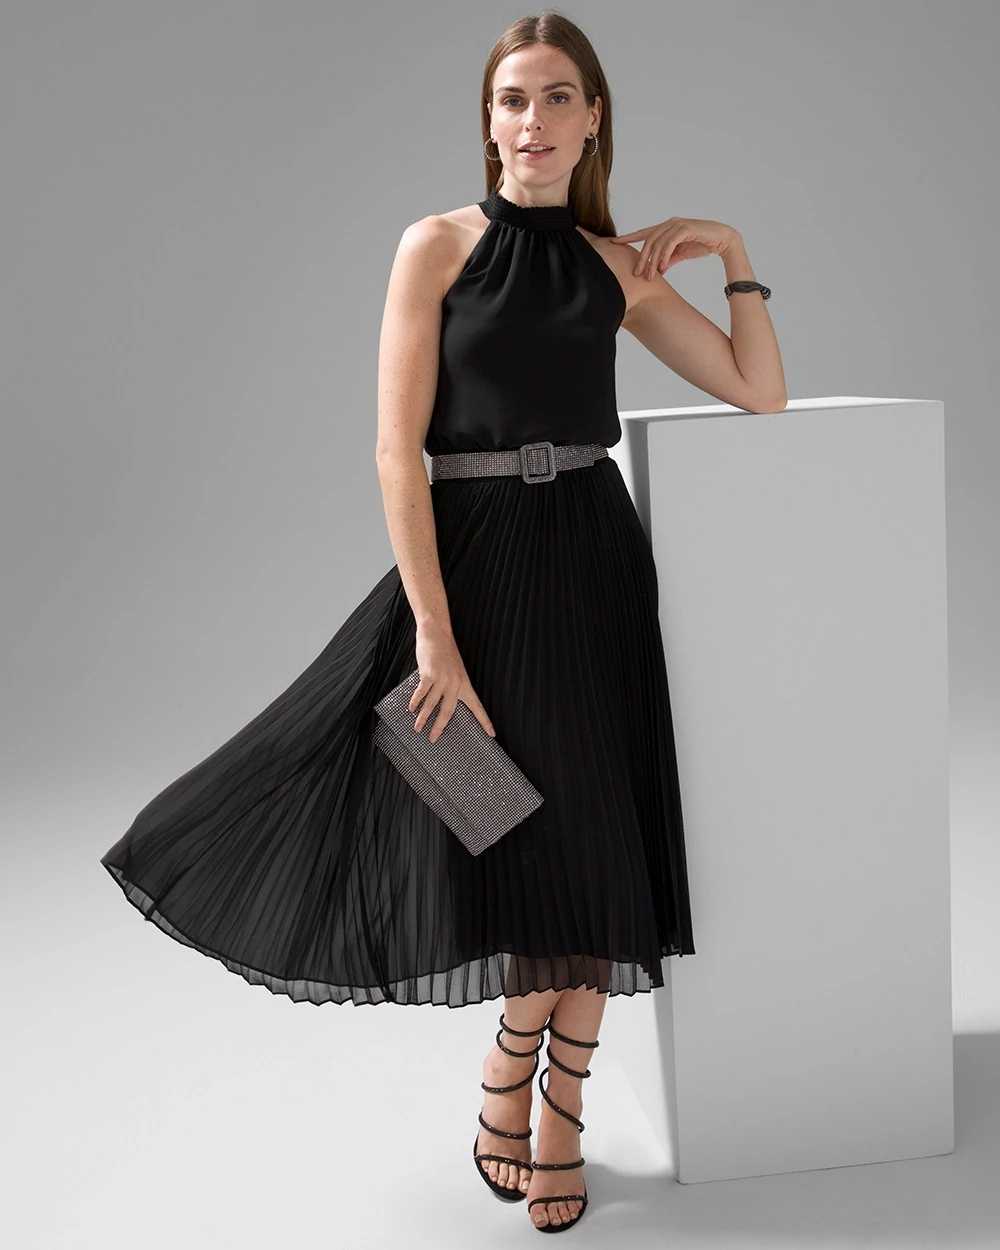 Petite Pleated Halter Midi Dress click to view larger image.